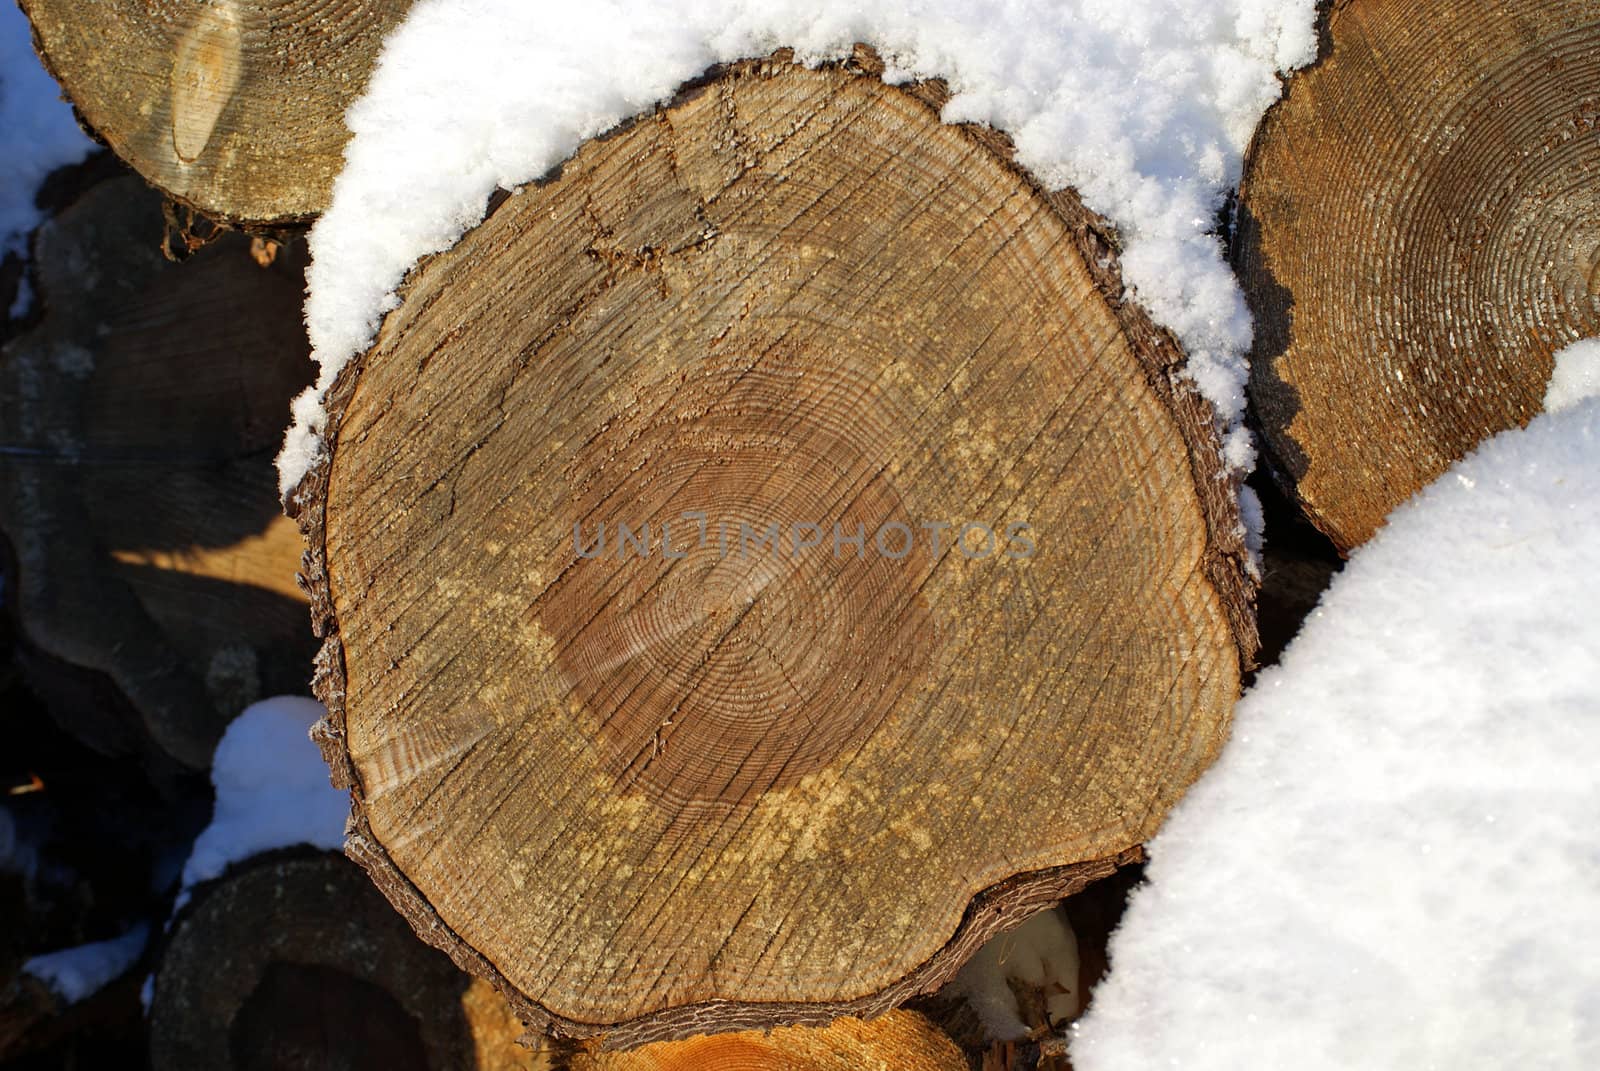 A macro view of a snow covered  pine log  showing the annual growth rings. Photographed in Salo, Finland December 2010.